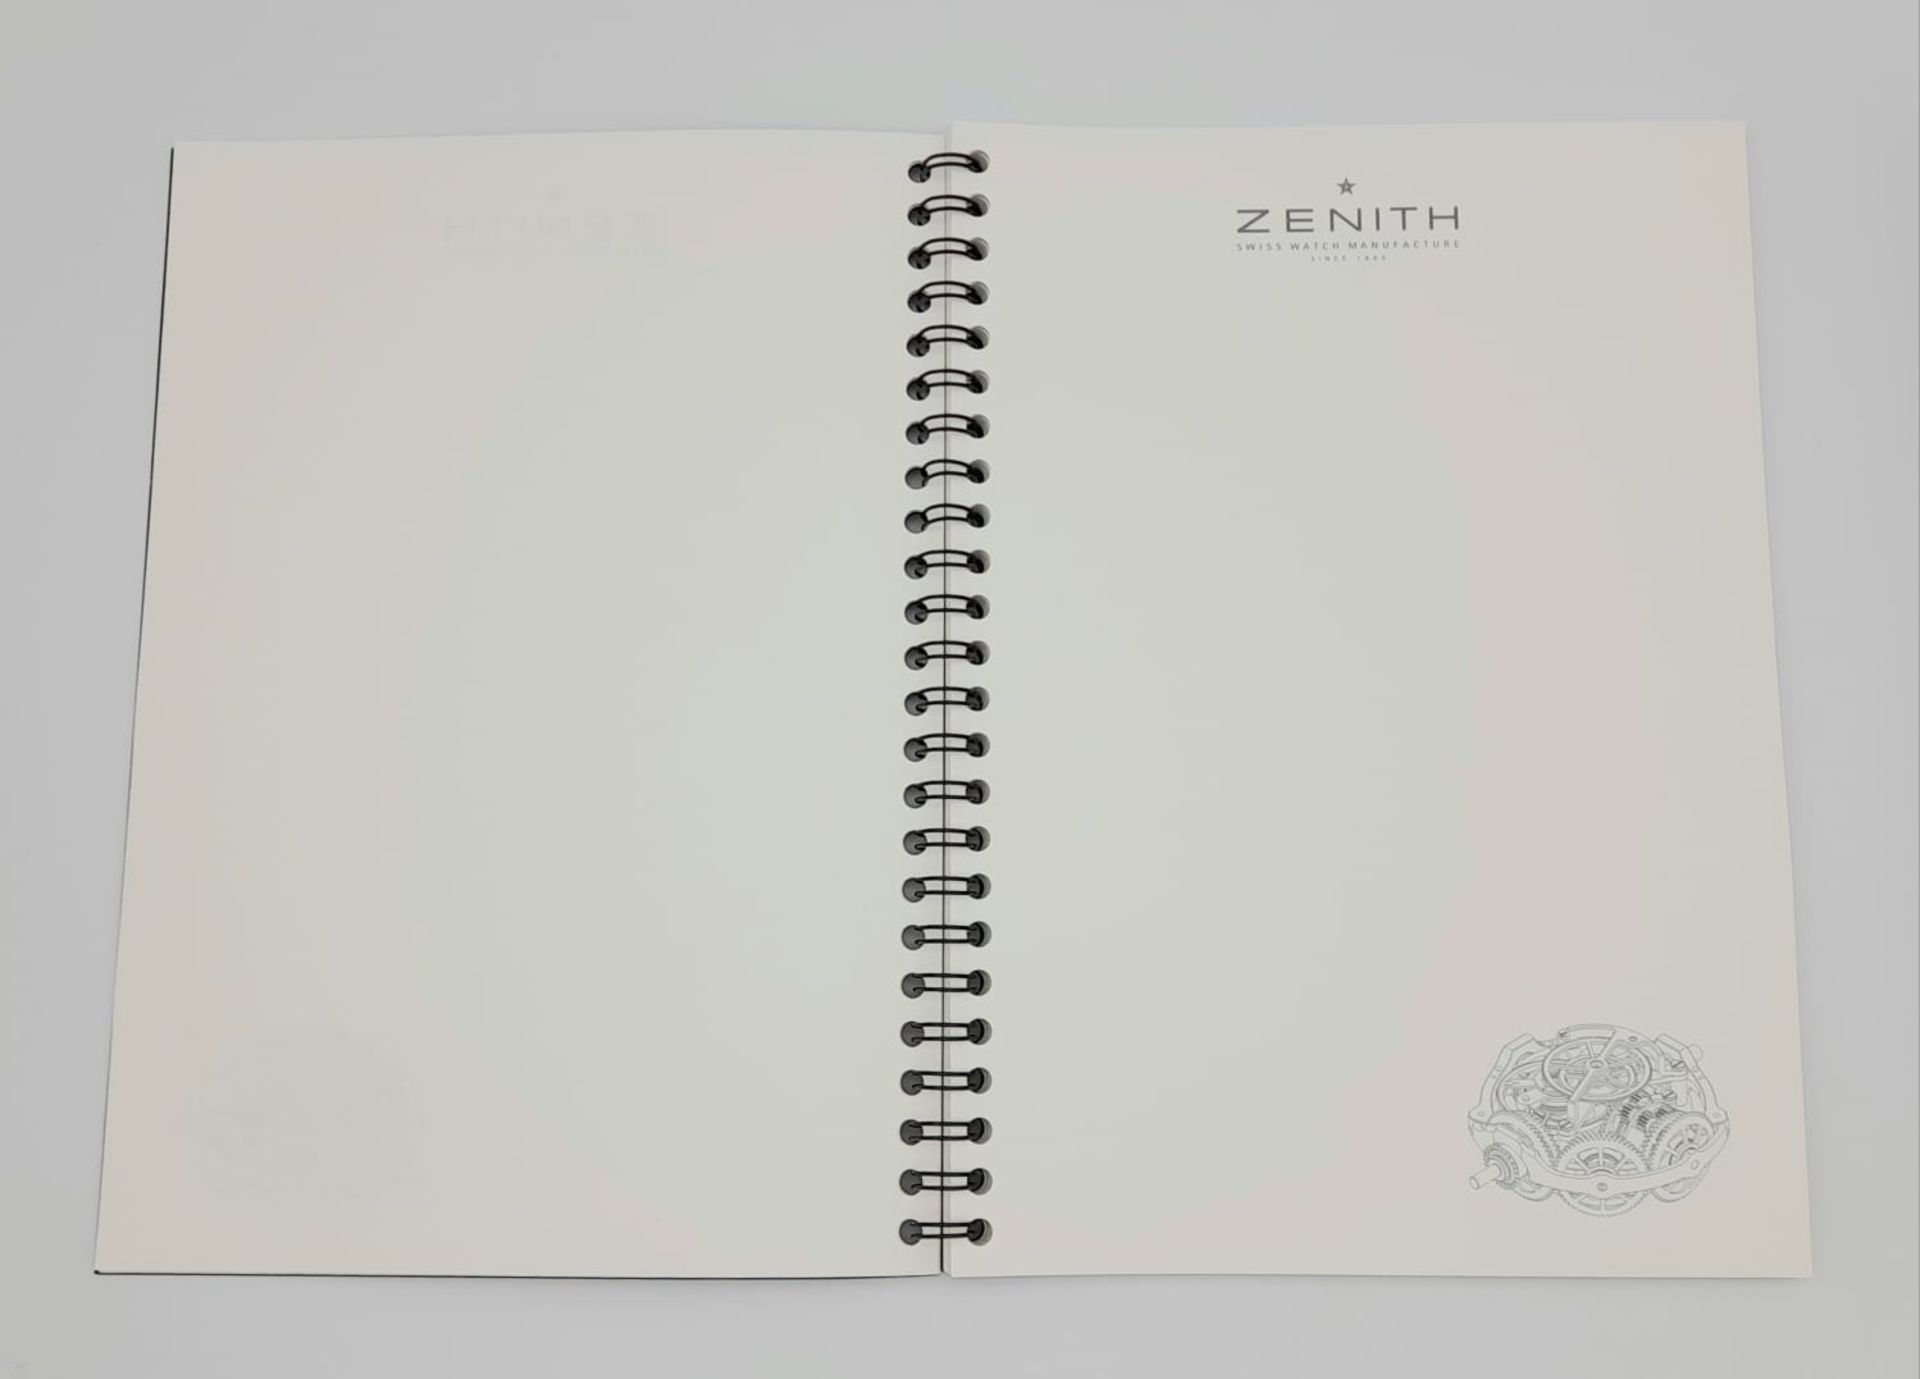 COLLECTION OF 2X ZENITH WATCH COMPANY NOTEBOOKS WITH A ZENITH BOOKMARK - Image 14 of 16